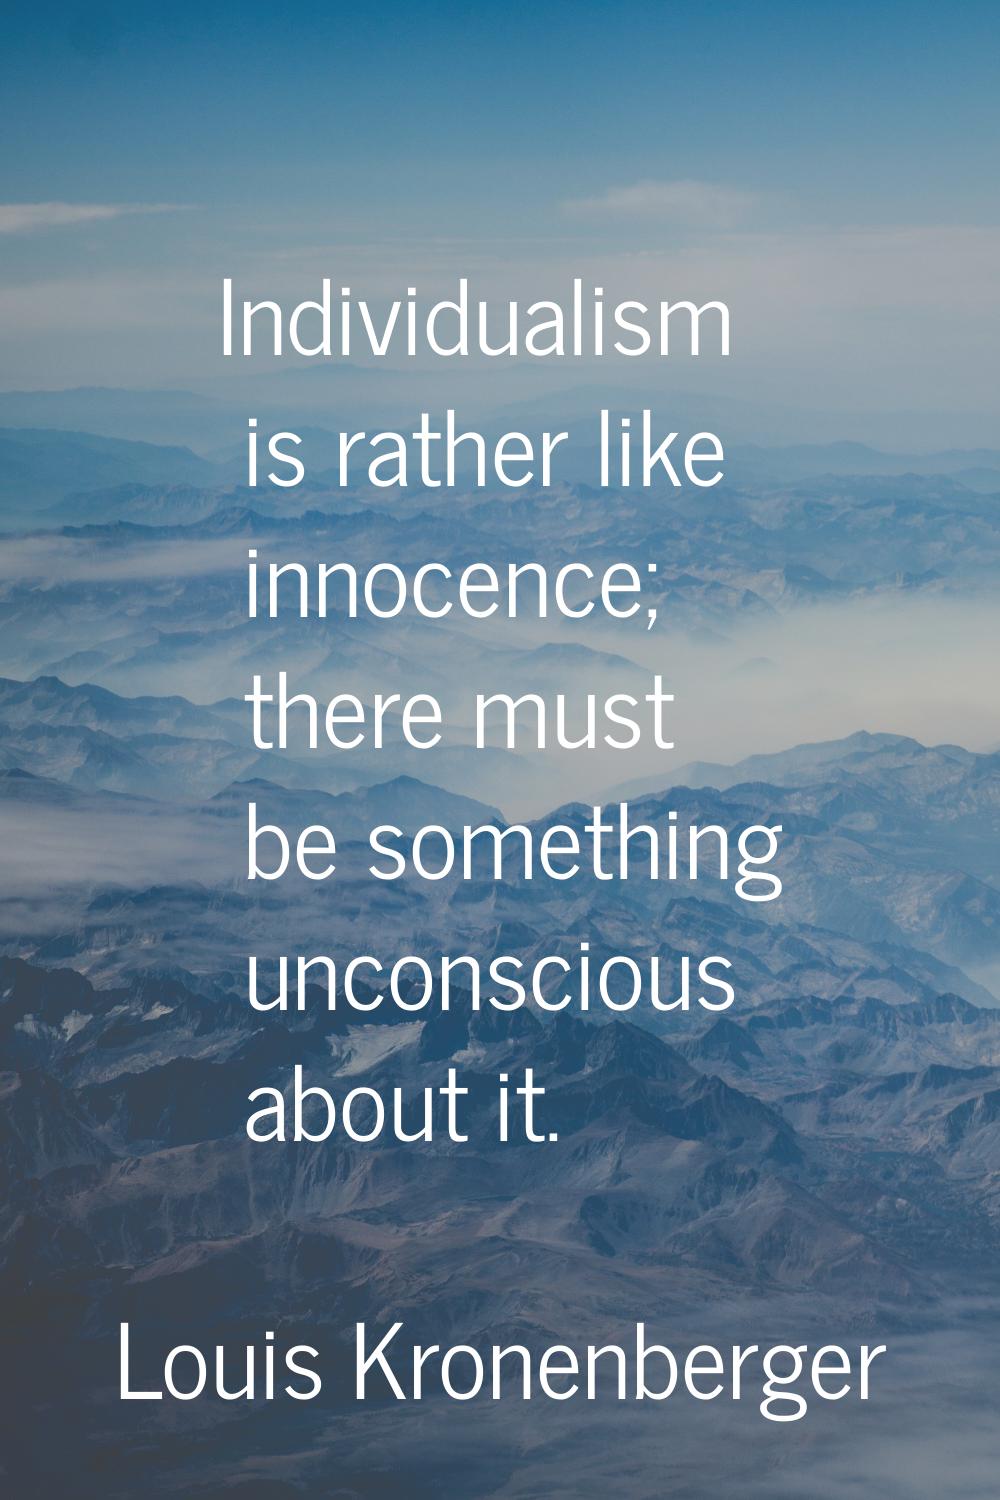 Individualism is rather like innocence; there must be something unconscious about it.